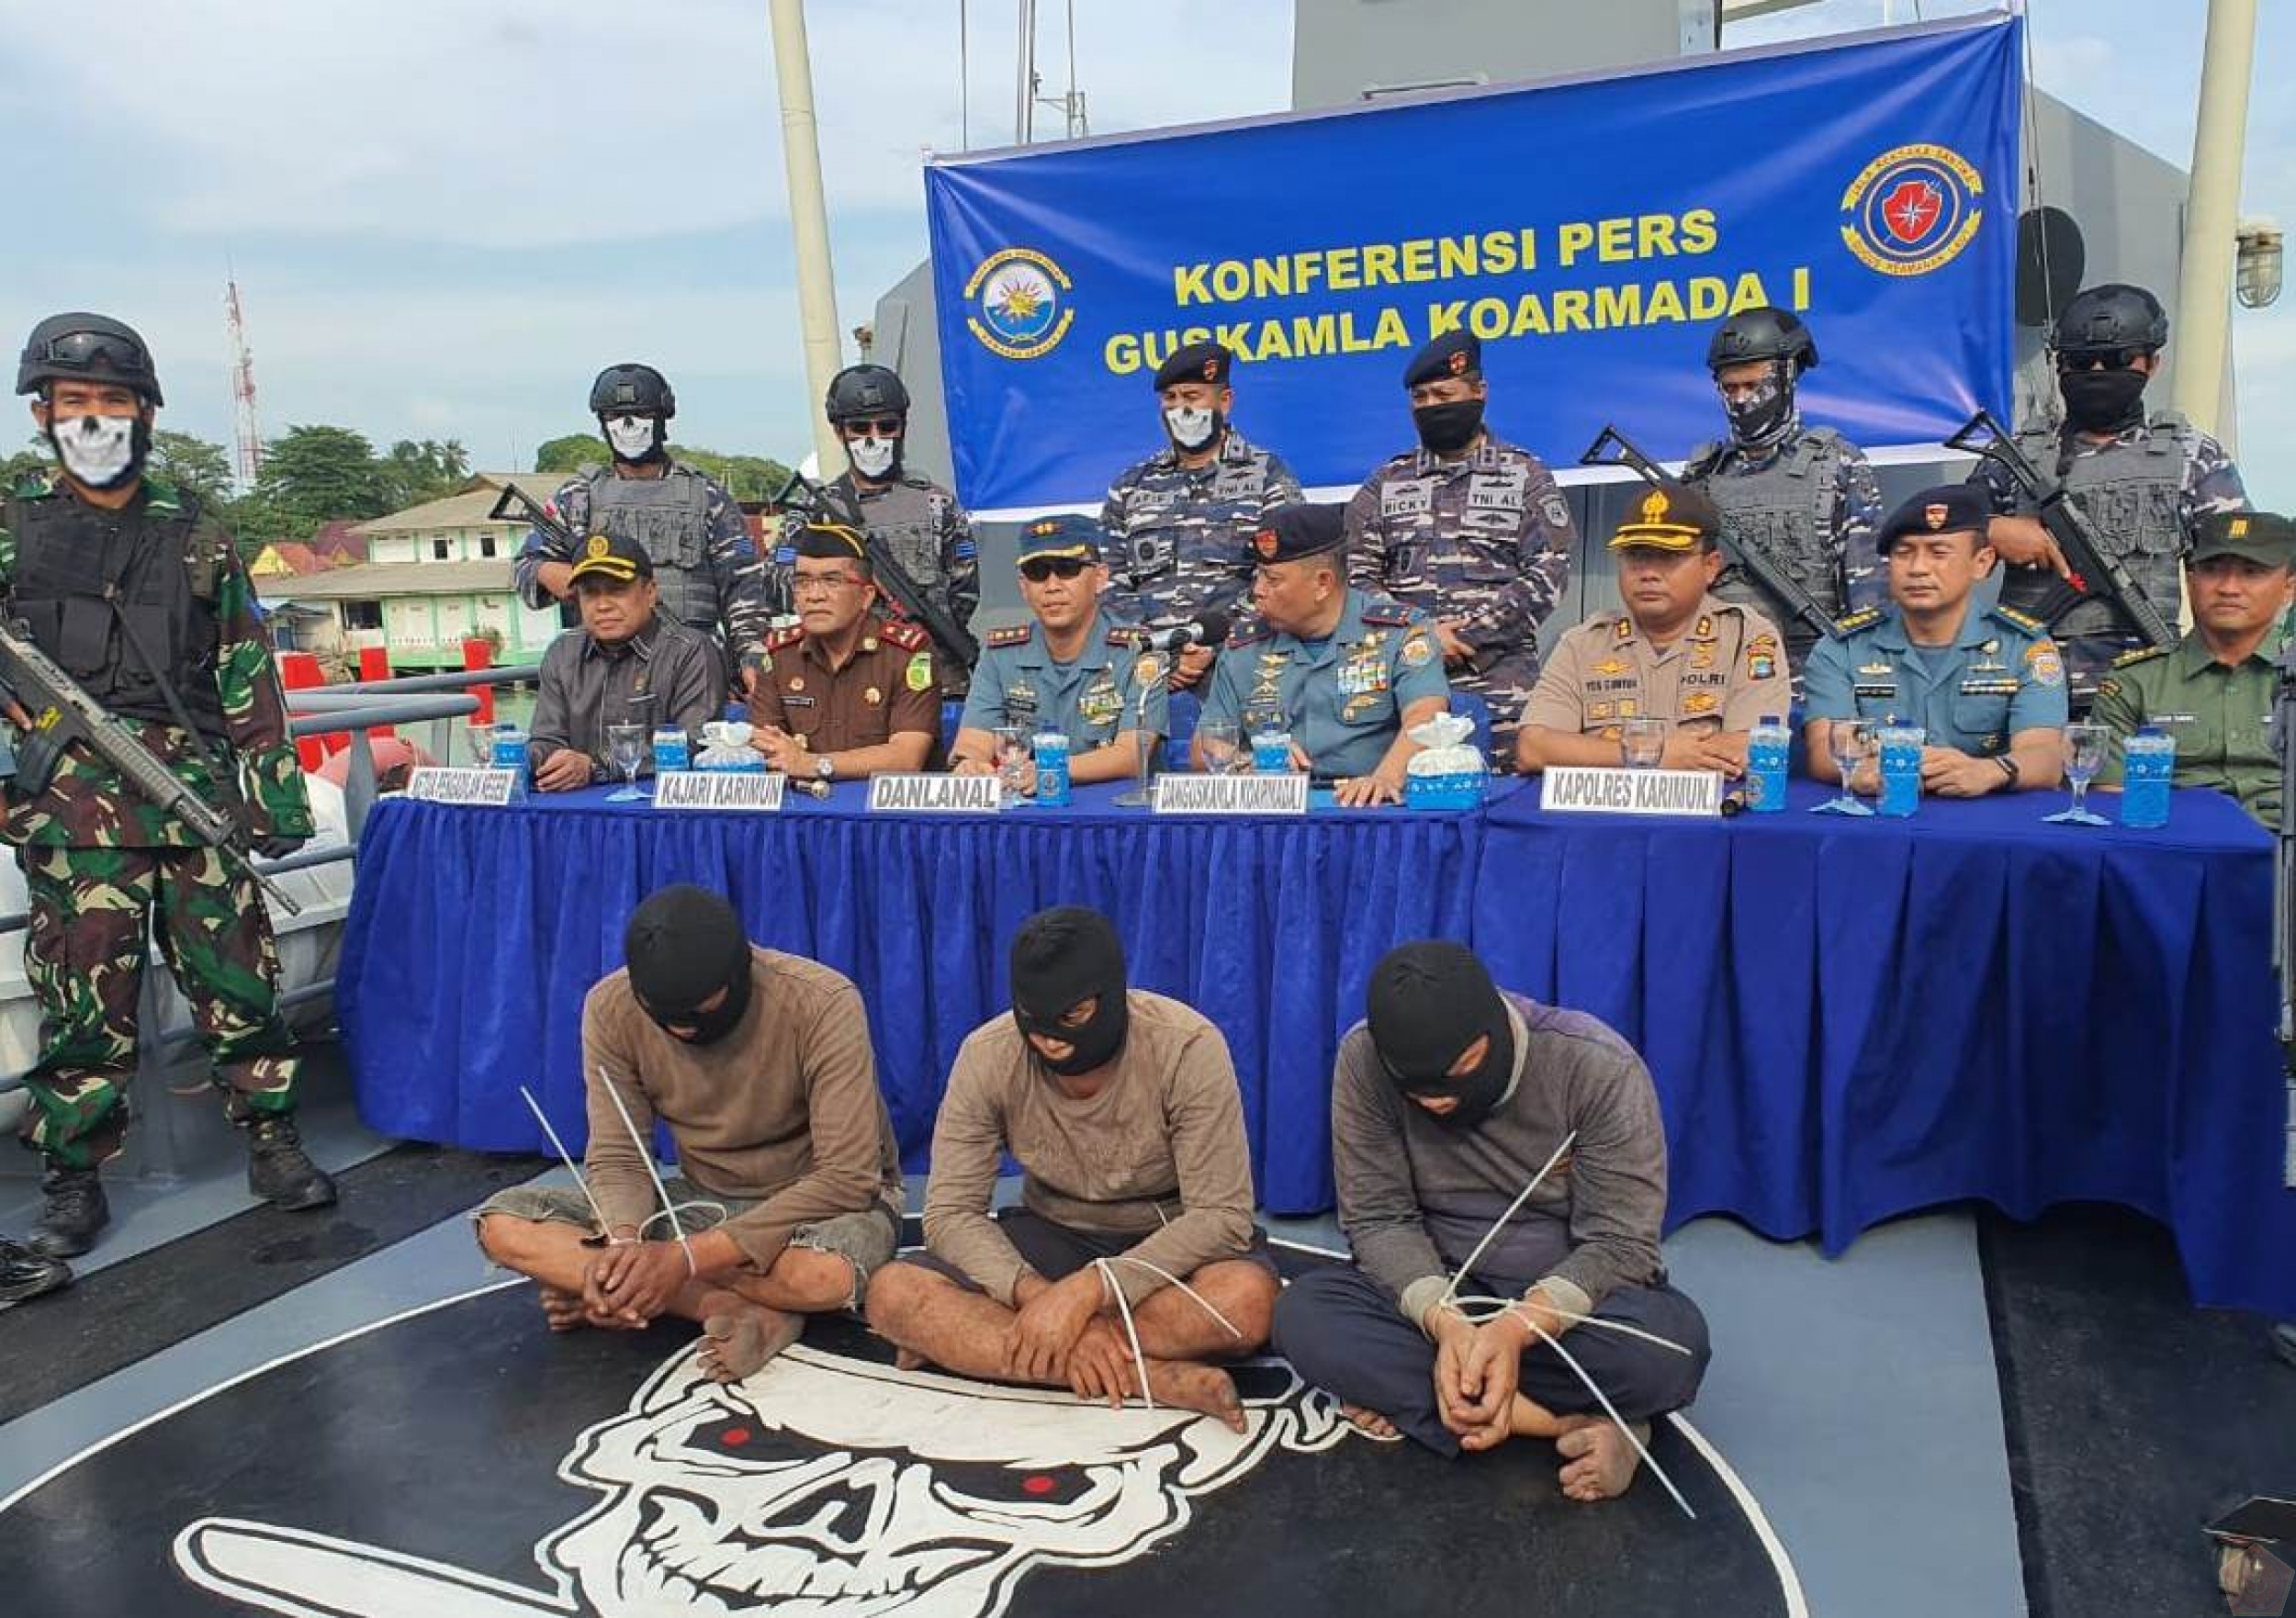 Indonesian Navy VBSS (Visit, board, search, and seizure) boarded the vessel and arrested the three robbers.